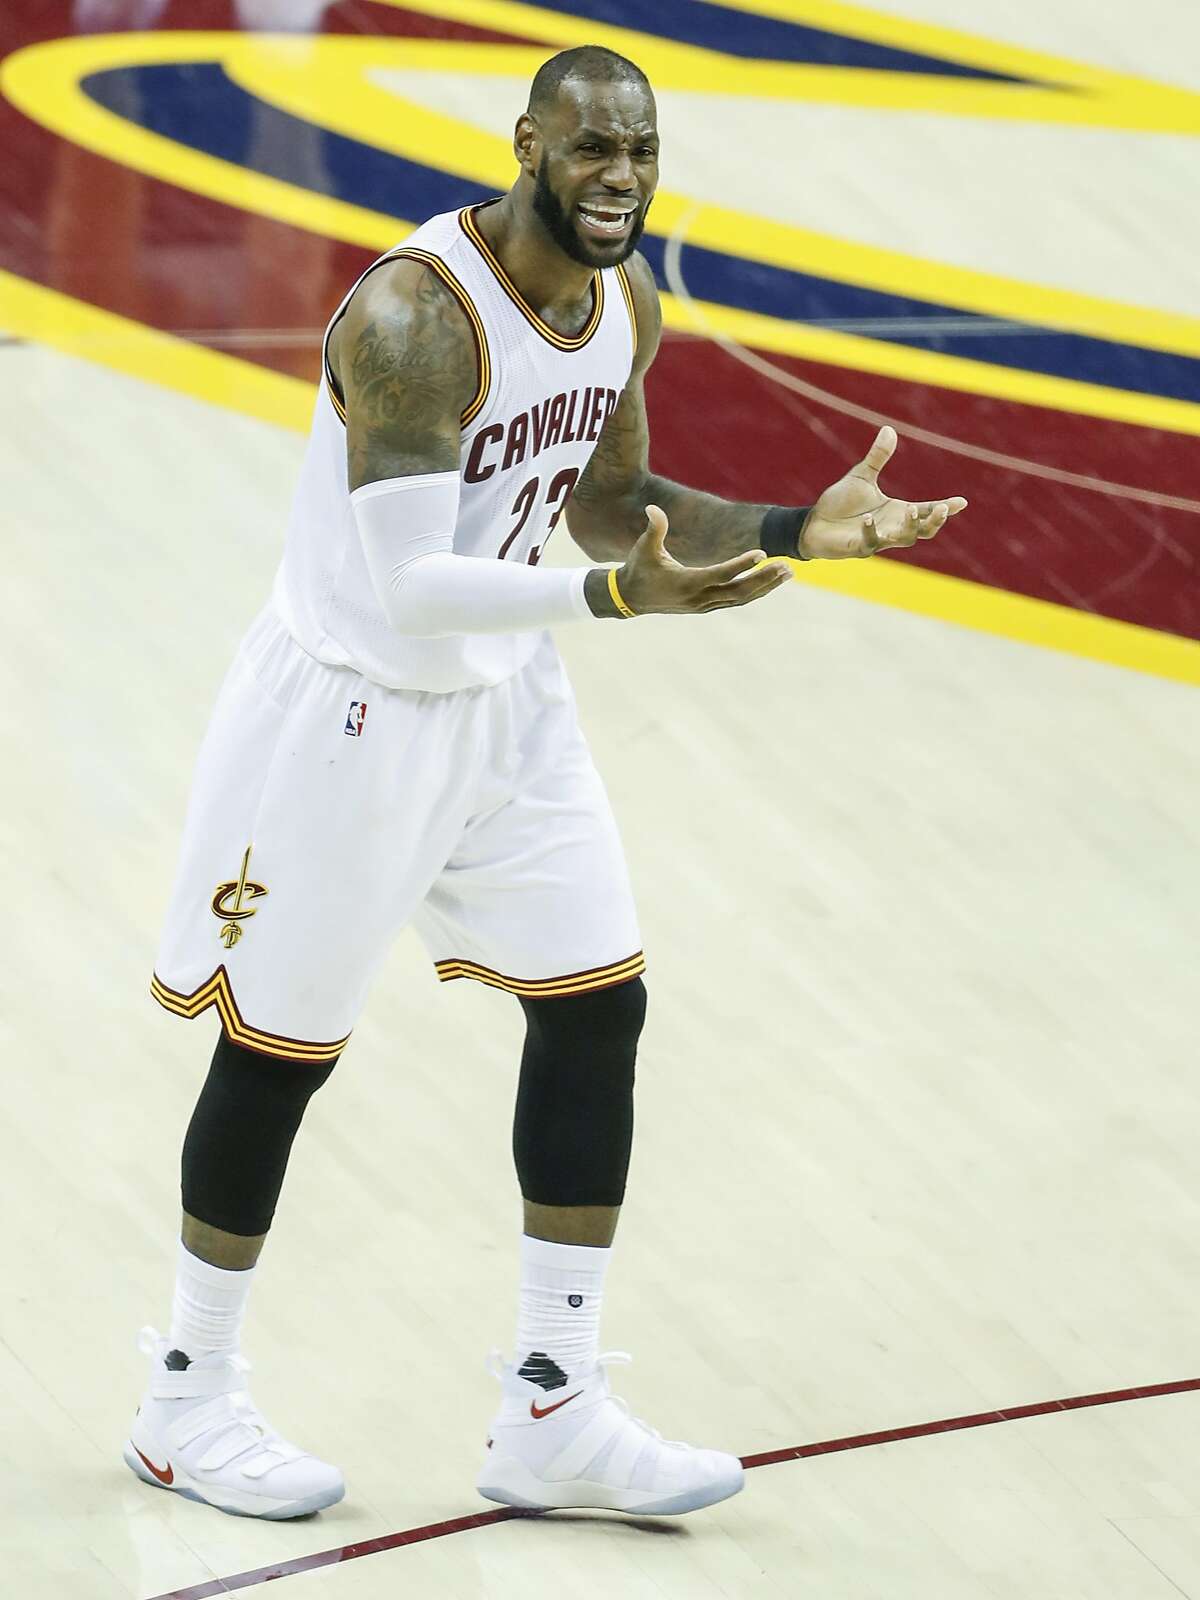 Cleveland Cavaliers' LeBron James reacts in the third quarter during Game 3 of the 2017 NBA Finals at Quicken Loans Arena on Wednesday, June 7, 2017 in Cleveland, Ohio